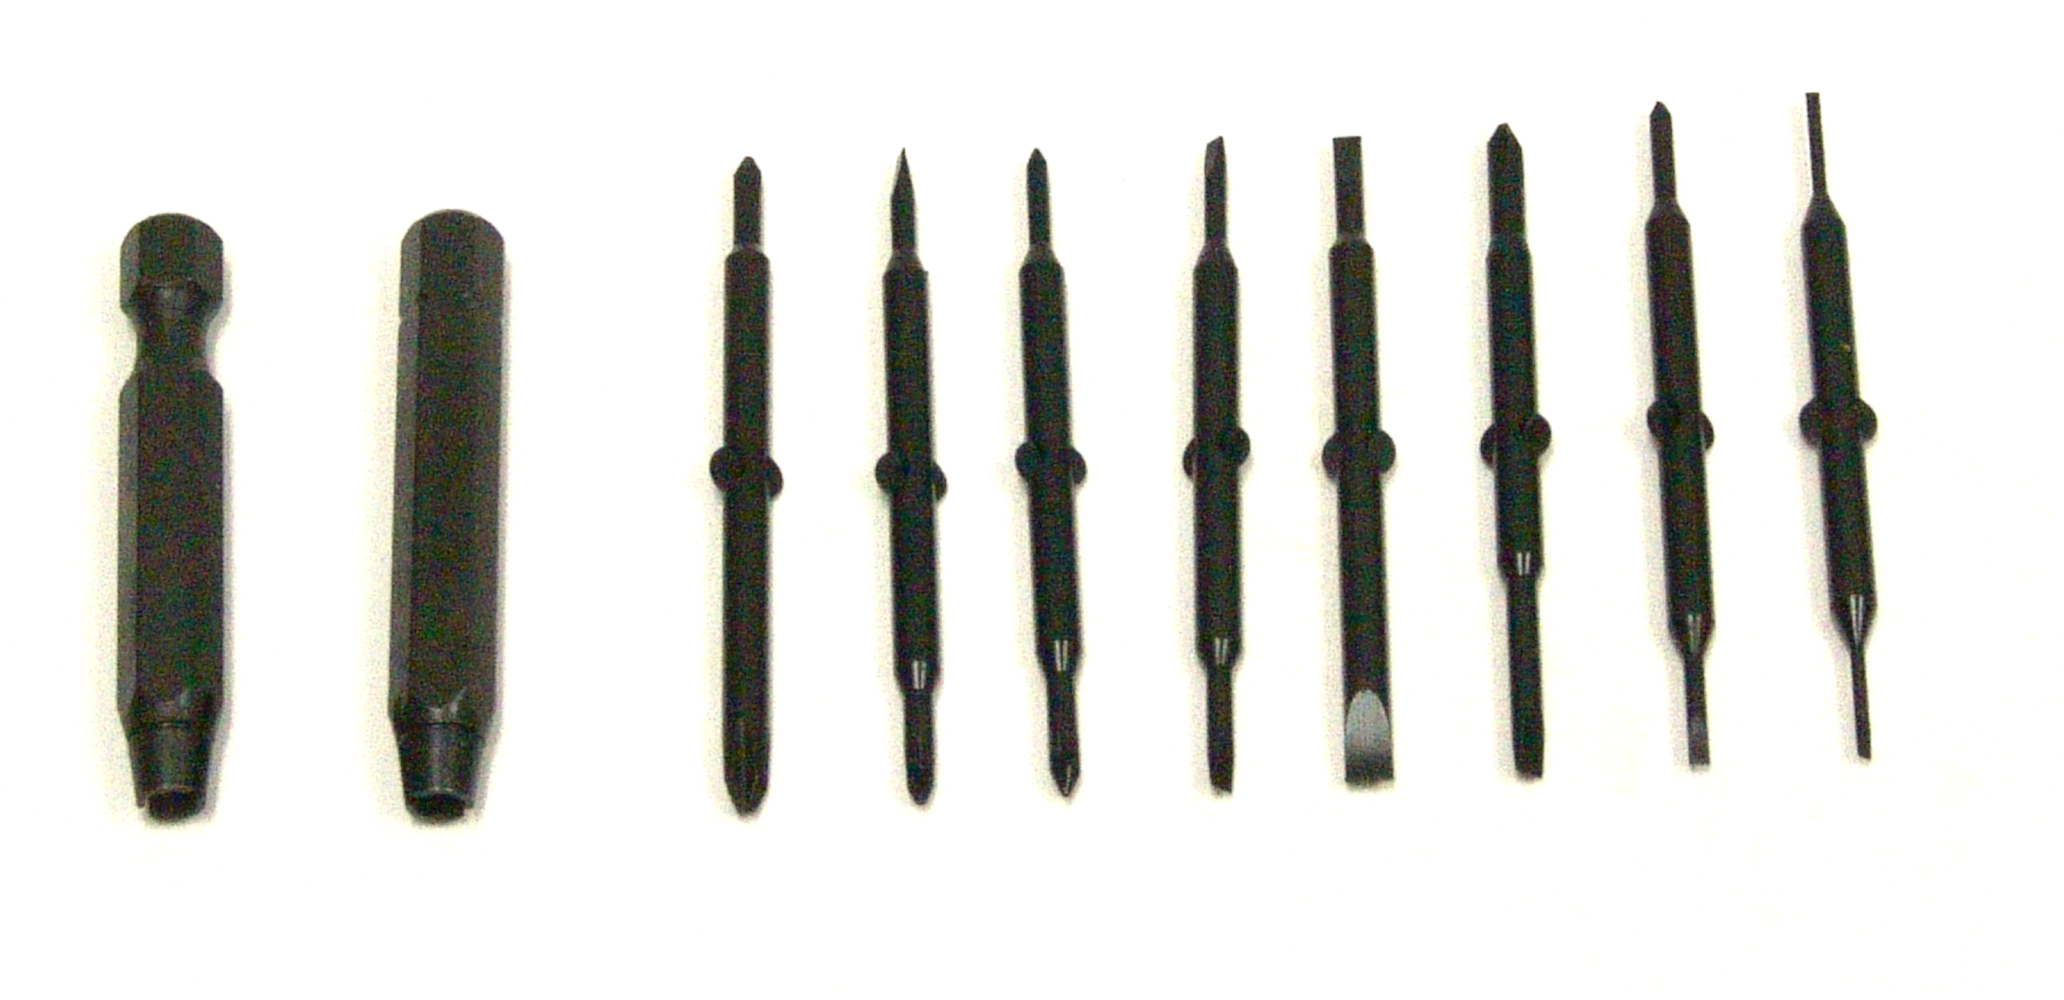 Adapter Set, 8 Double End Screwdriver Blades And 2 Adapters